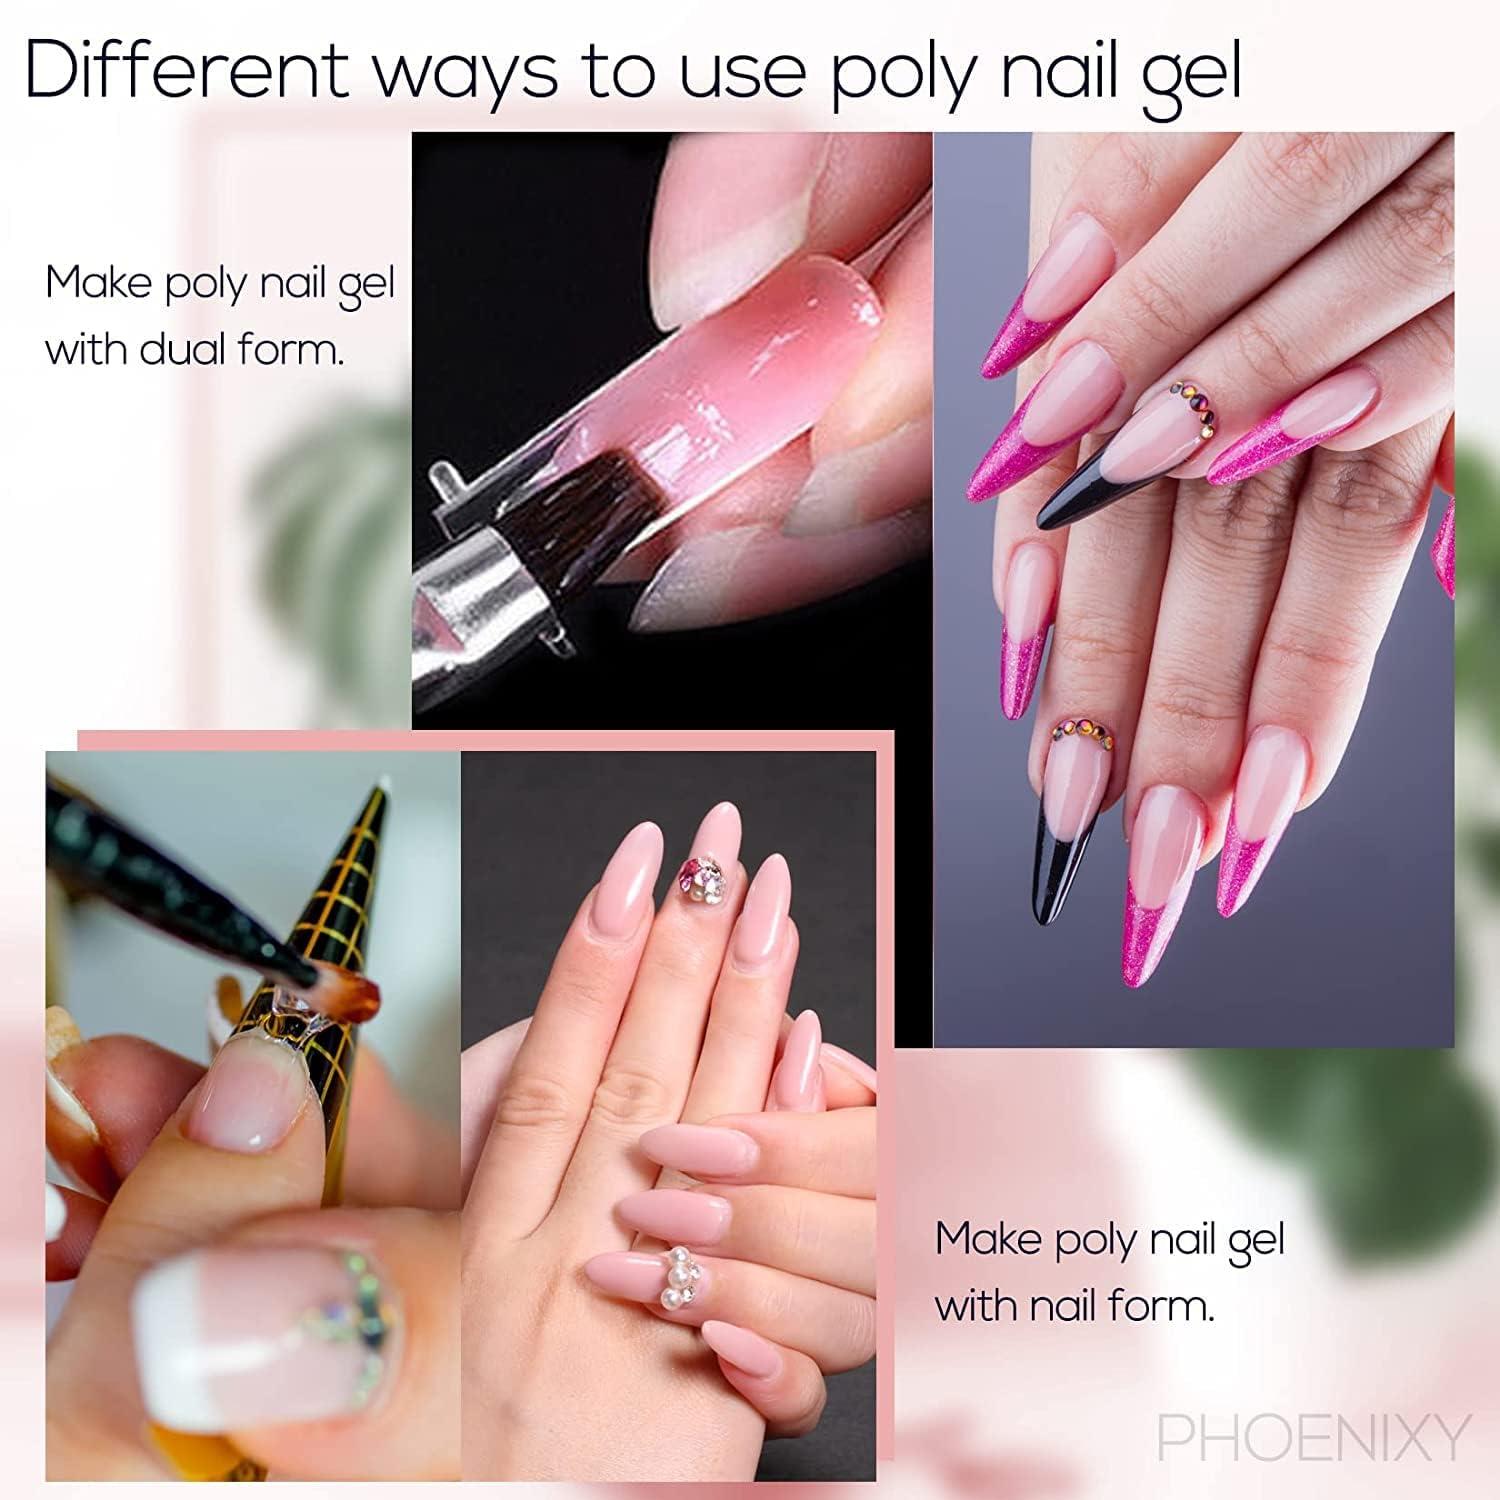 Amazon.com : Poly Nail Gel Kit Ohuhu: 18 Colors Nail Gel Kit - Enhancement  Builder with 4 Temperature Color Changing Extension - 10 Regular Color and  4 Glitter Color - Poly Nail